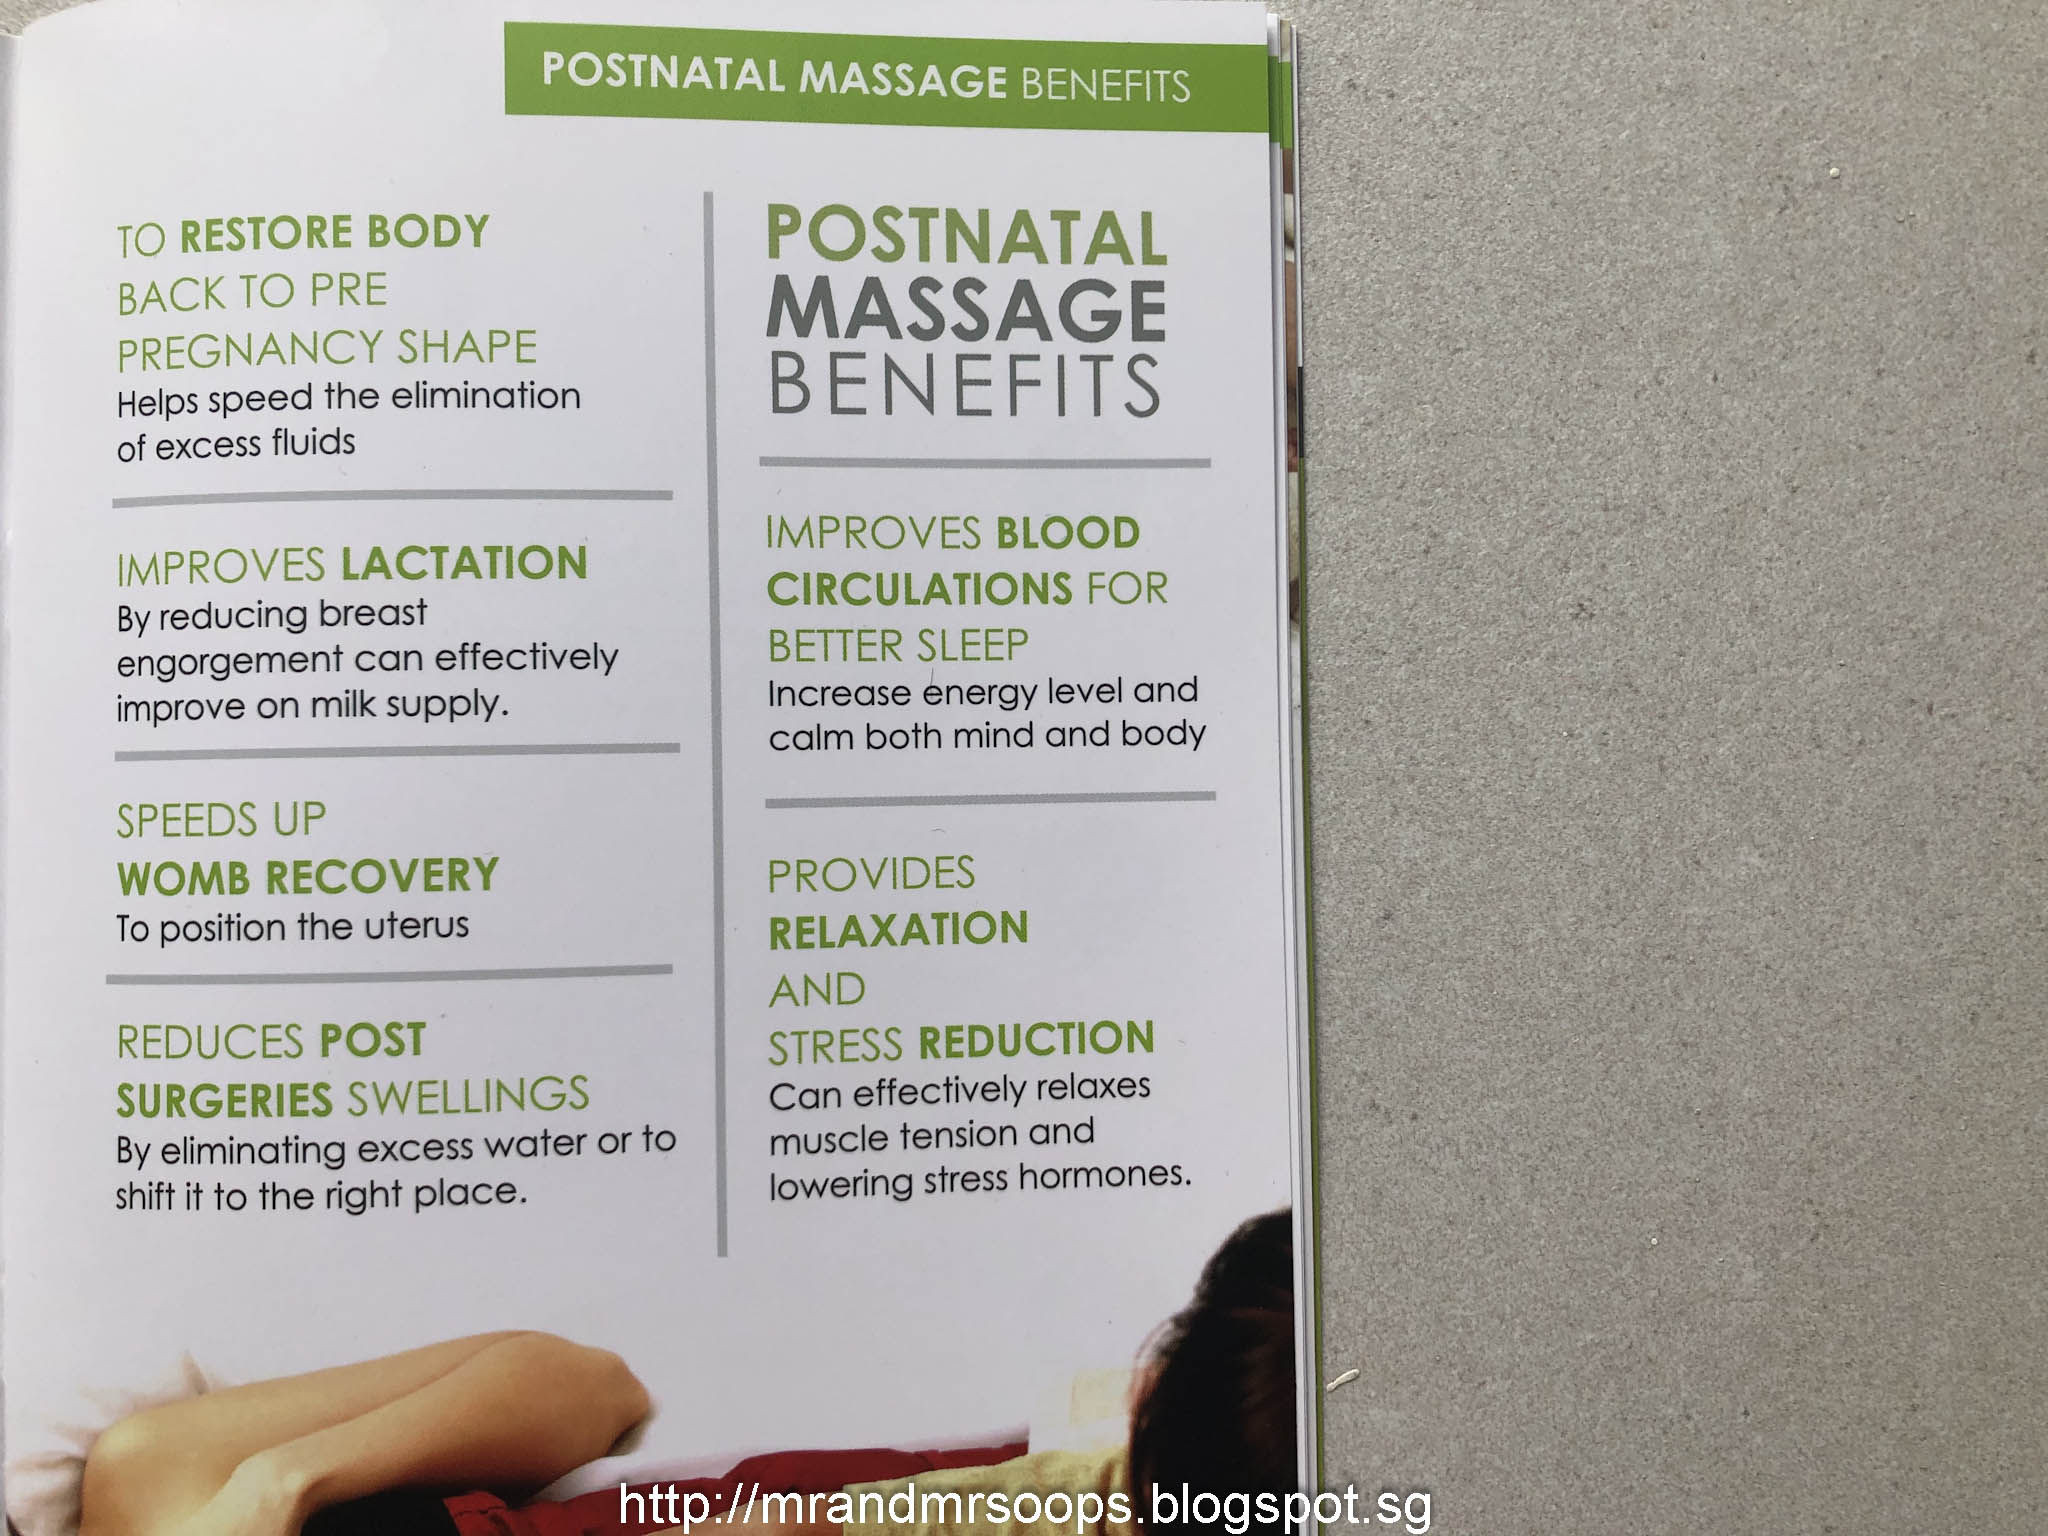 10 Things You Would Experience During Postpartum Period - Post Natal  Massage Singapore